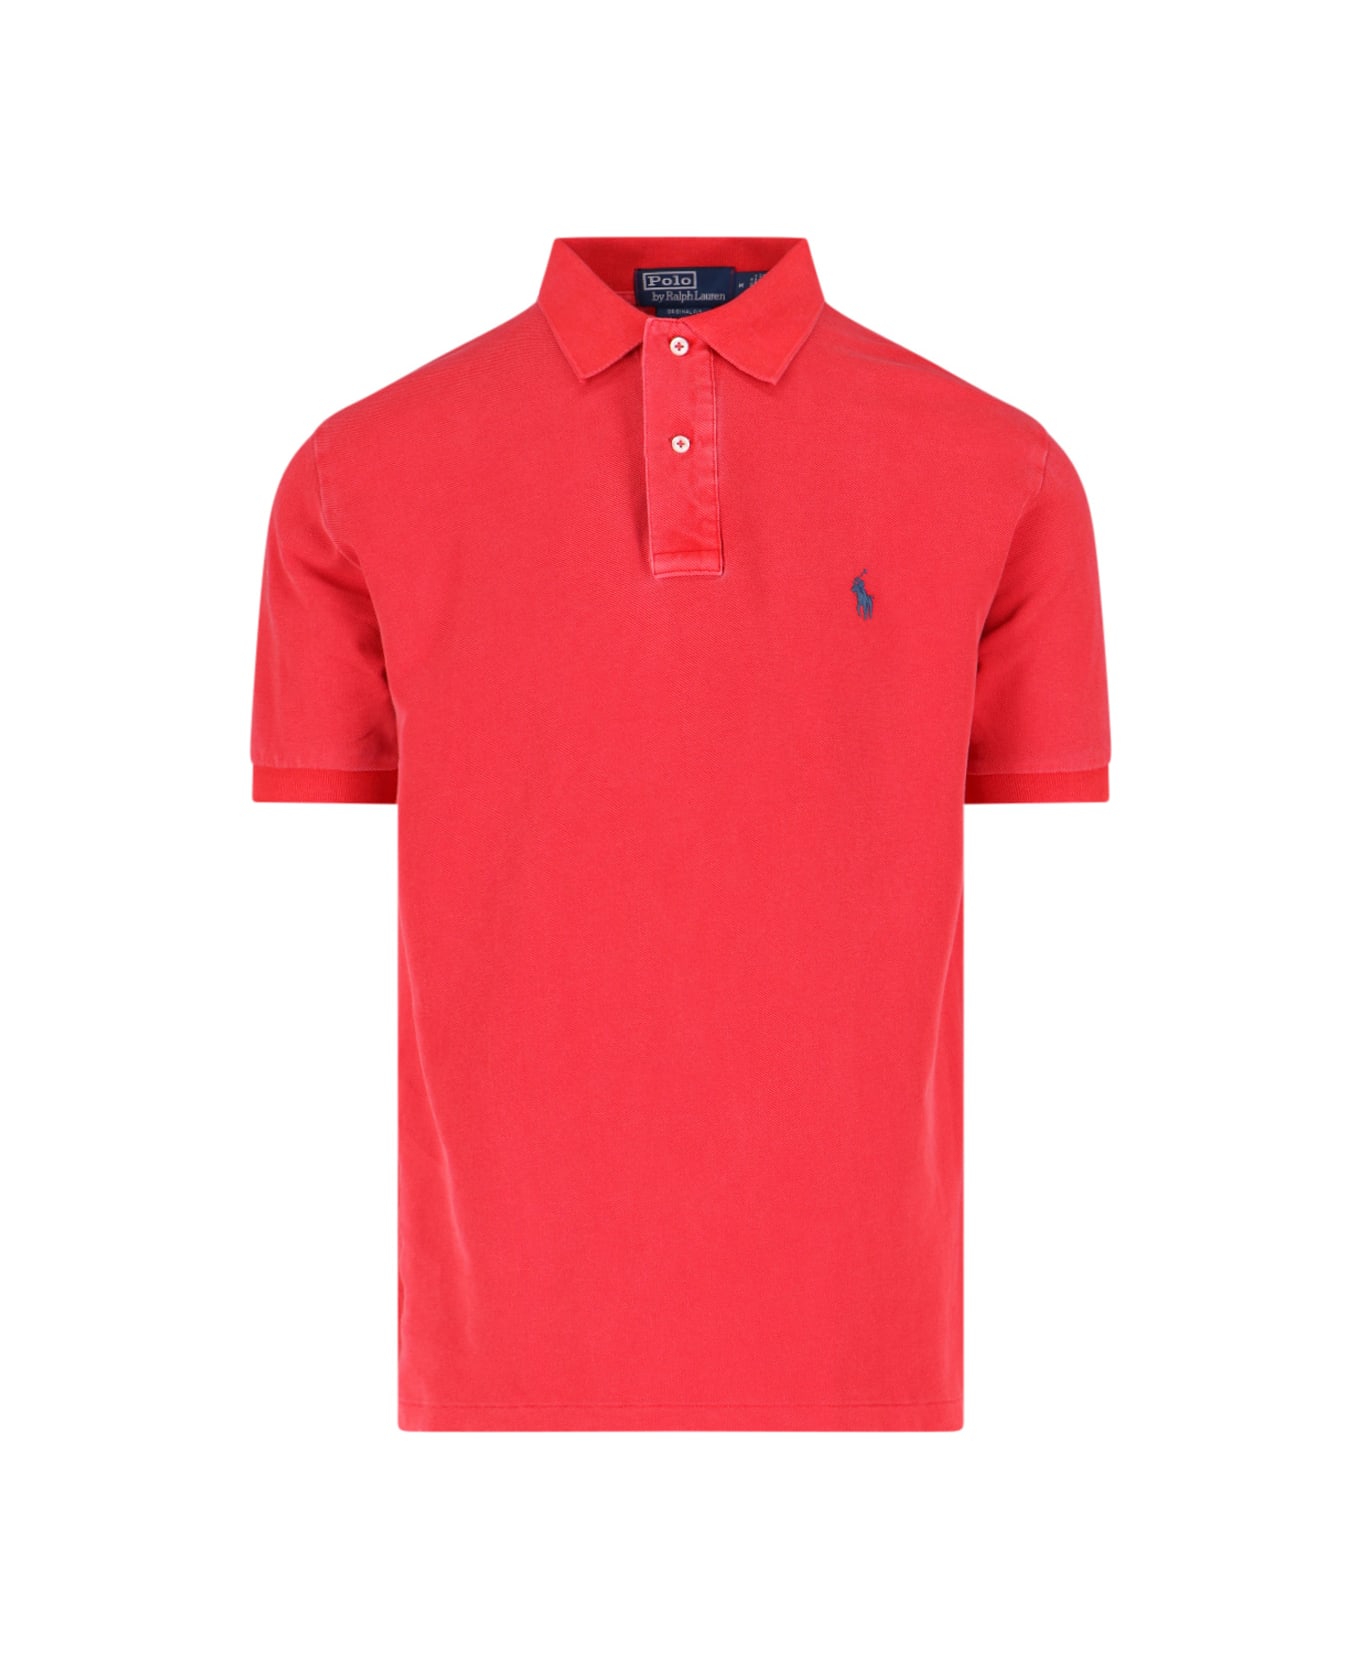 Polo Ralph Lauren Embroidered Logo Polo Shirt - Red